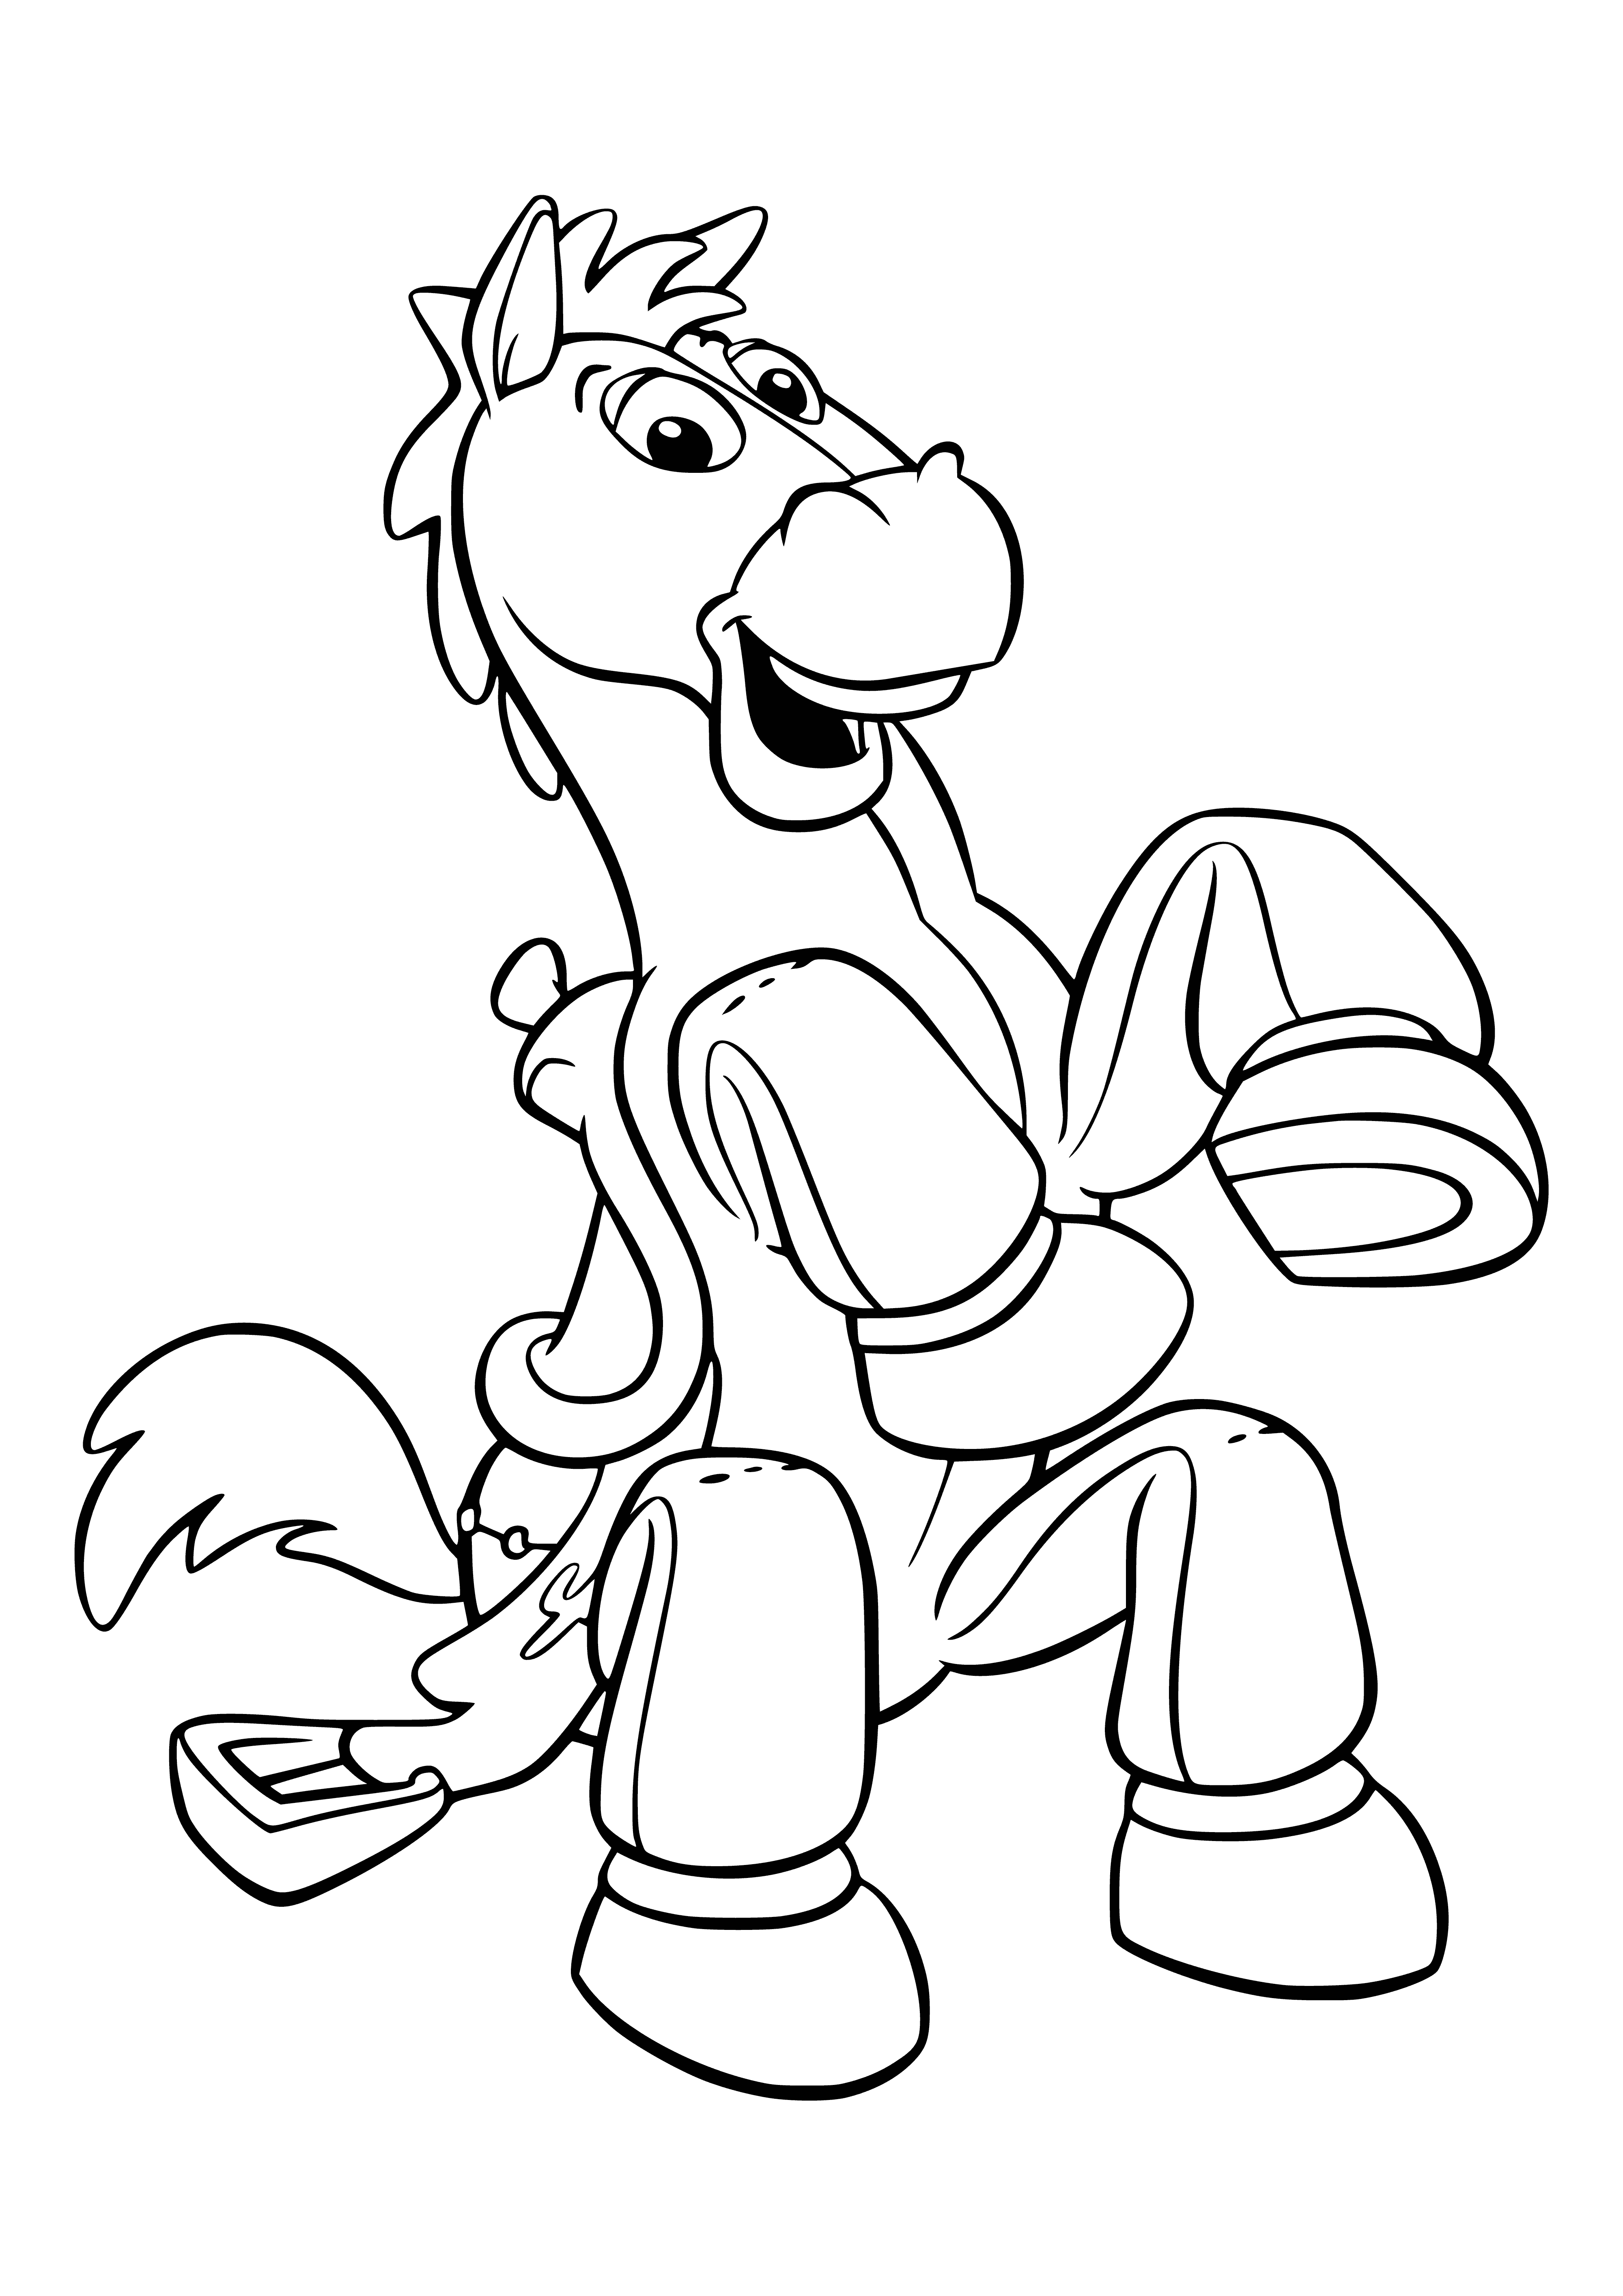 Bullzai horse coloring page